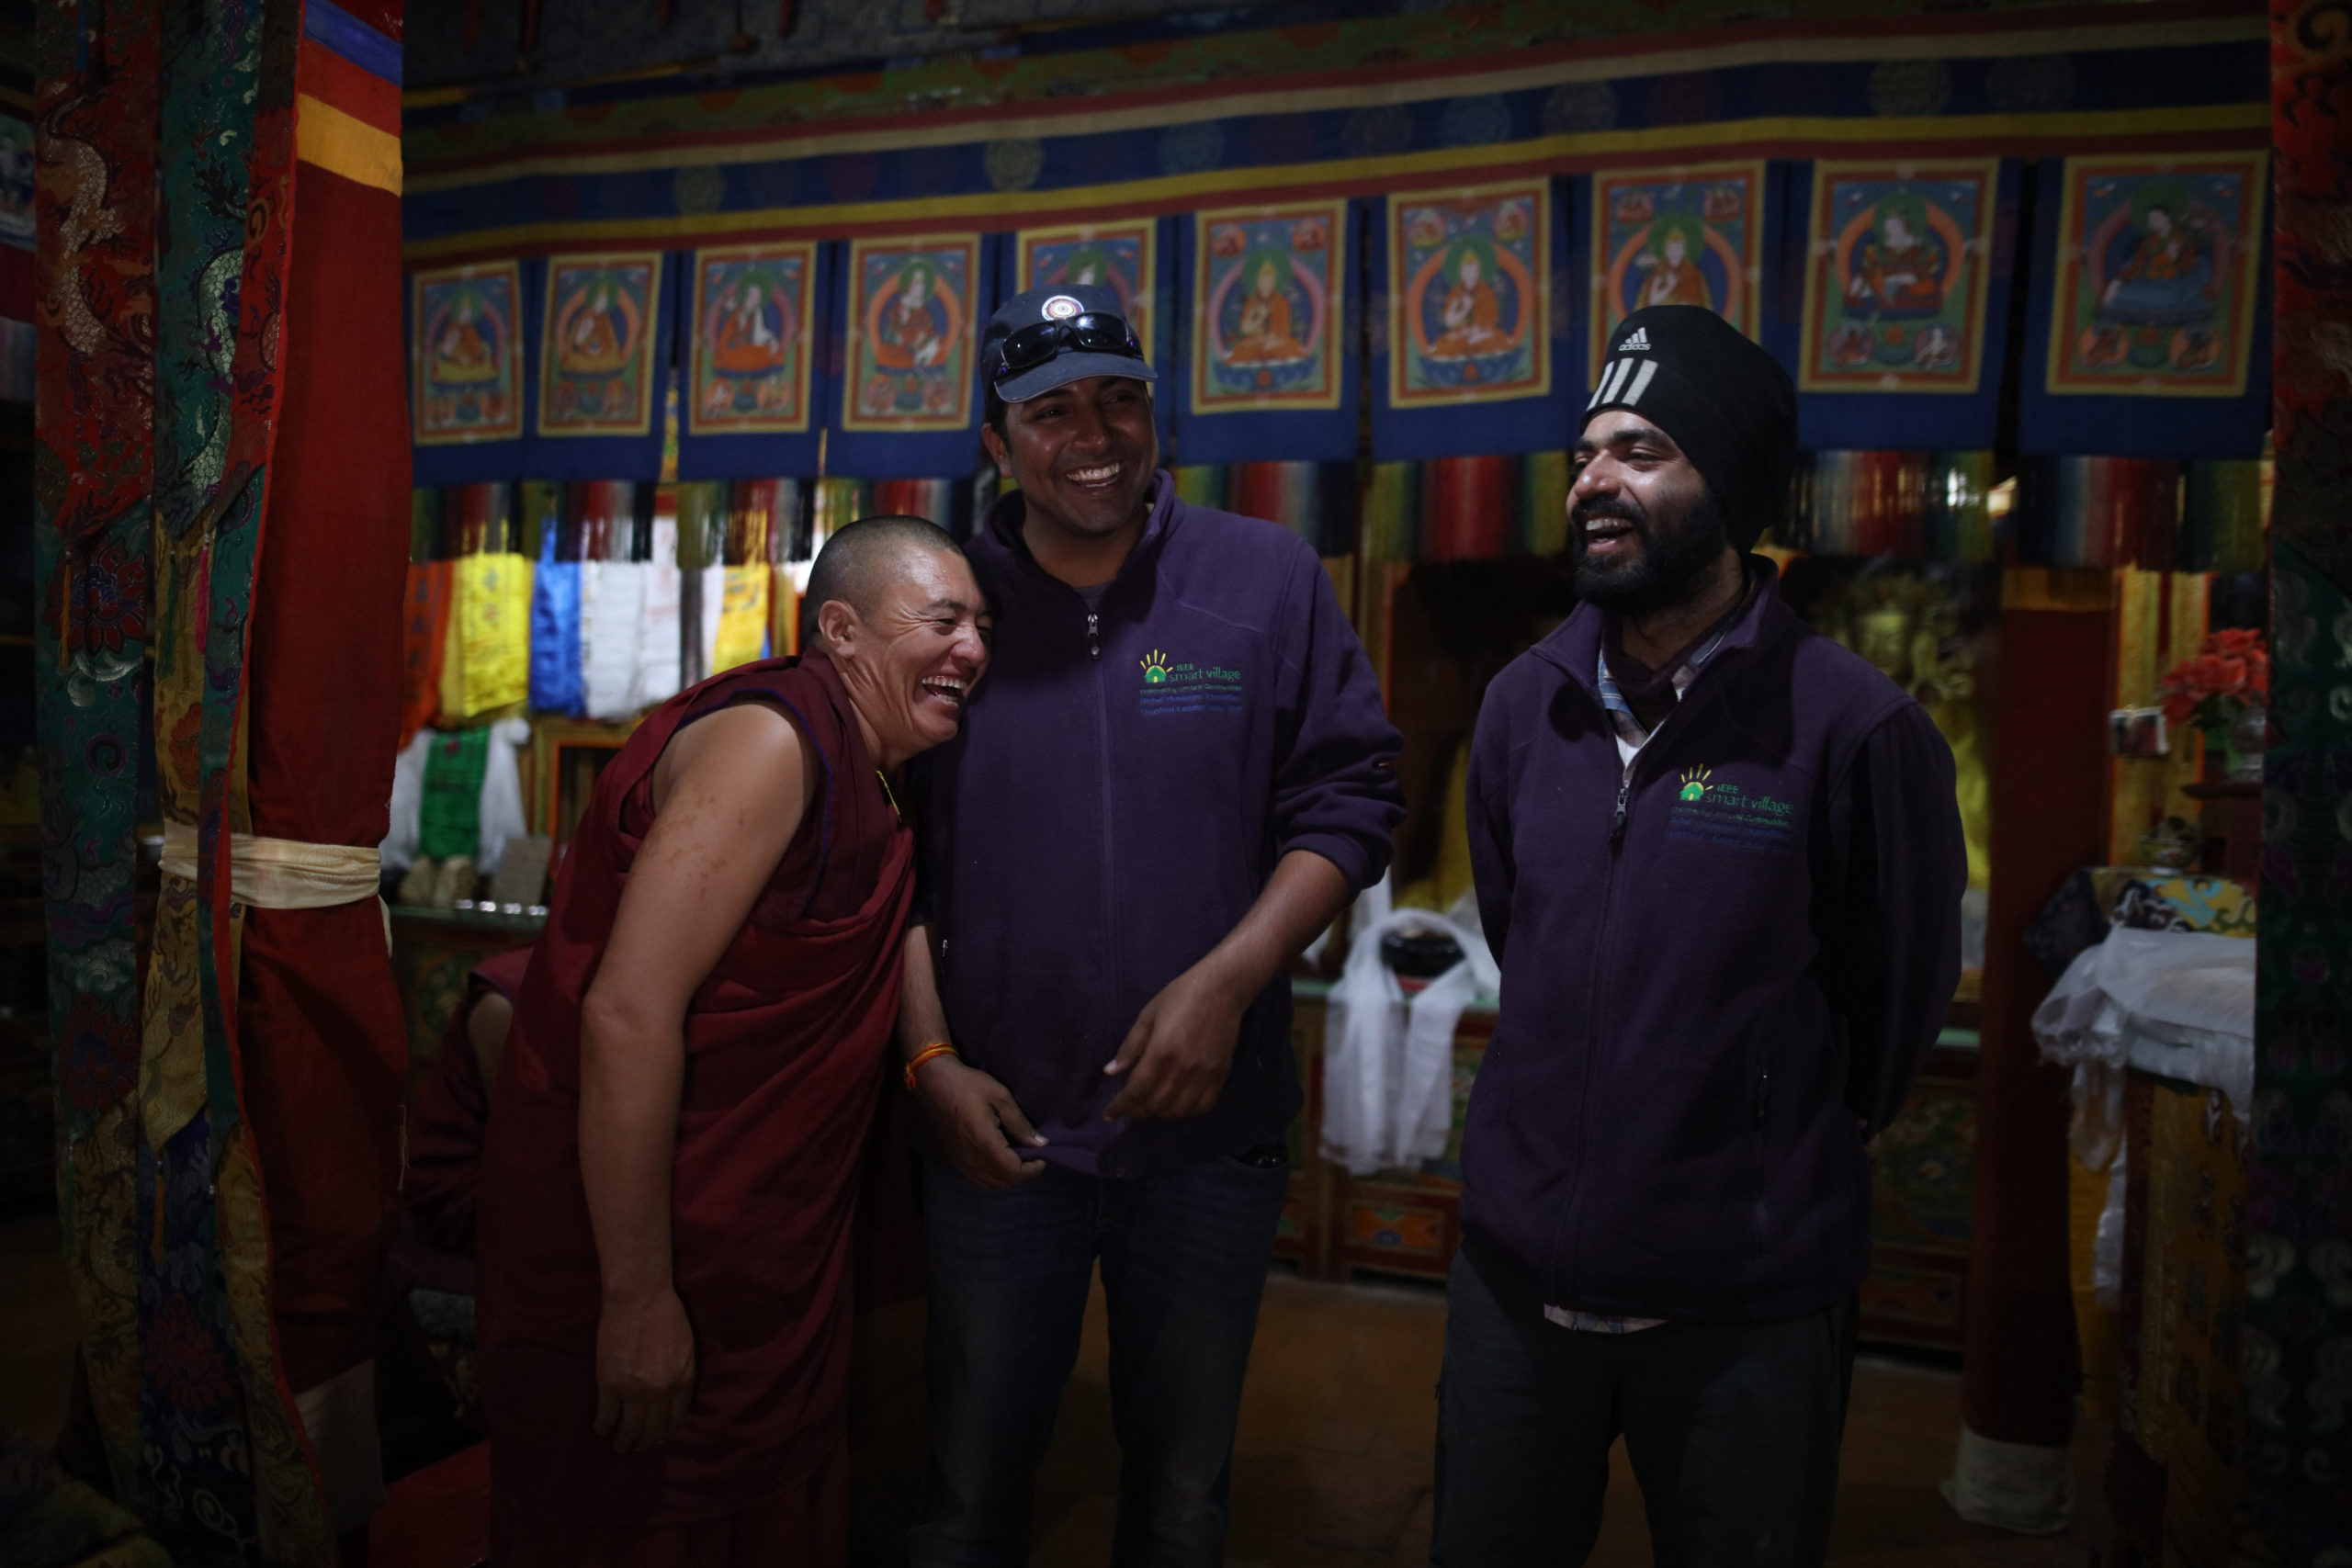 Founder Paras Loomba and COO Jaideep Bansal at Lingshed monastery in Ladakh in 2016